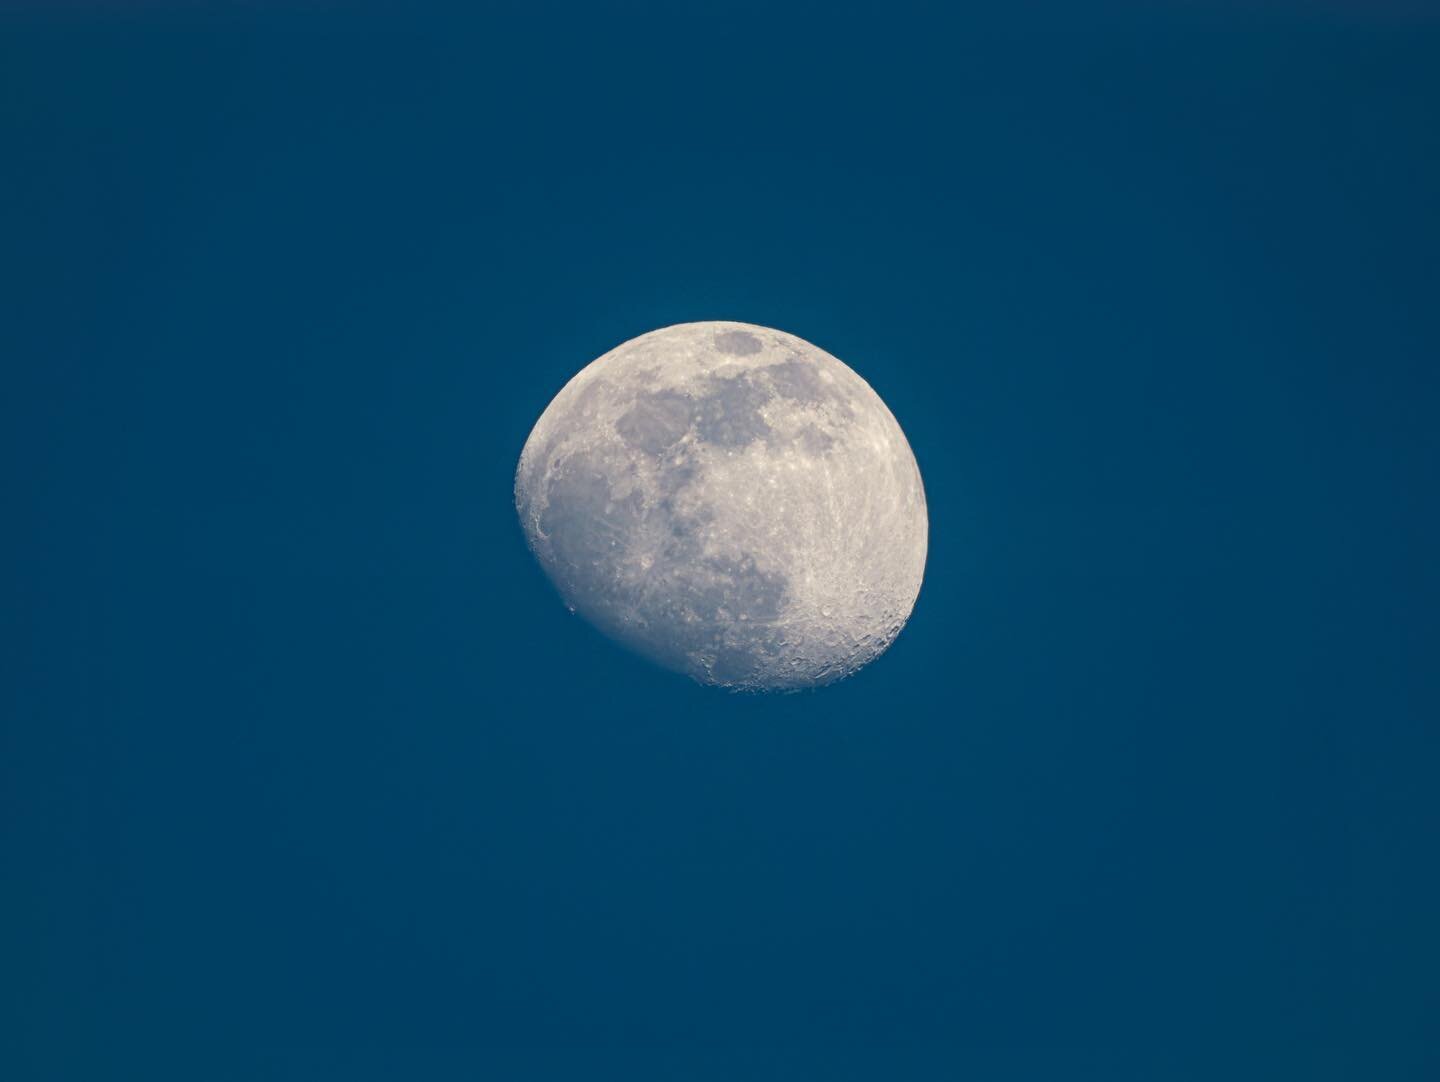 A fortunate moon. Lumix 35-100mm f/2.8. Even cropped in, quite sharp. #lumix35100 #moonporn #blue #moon #beautiful